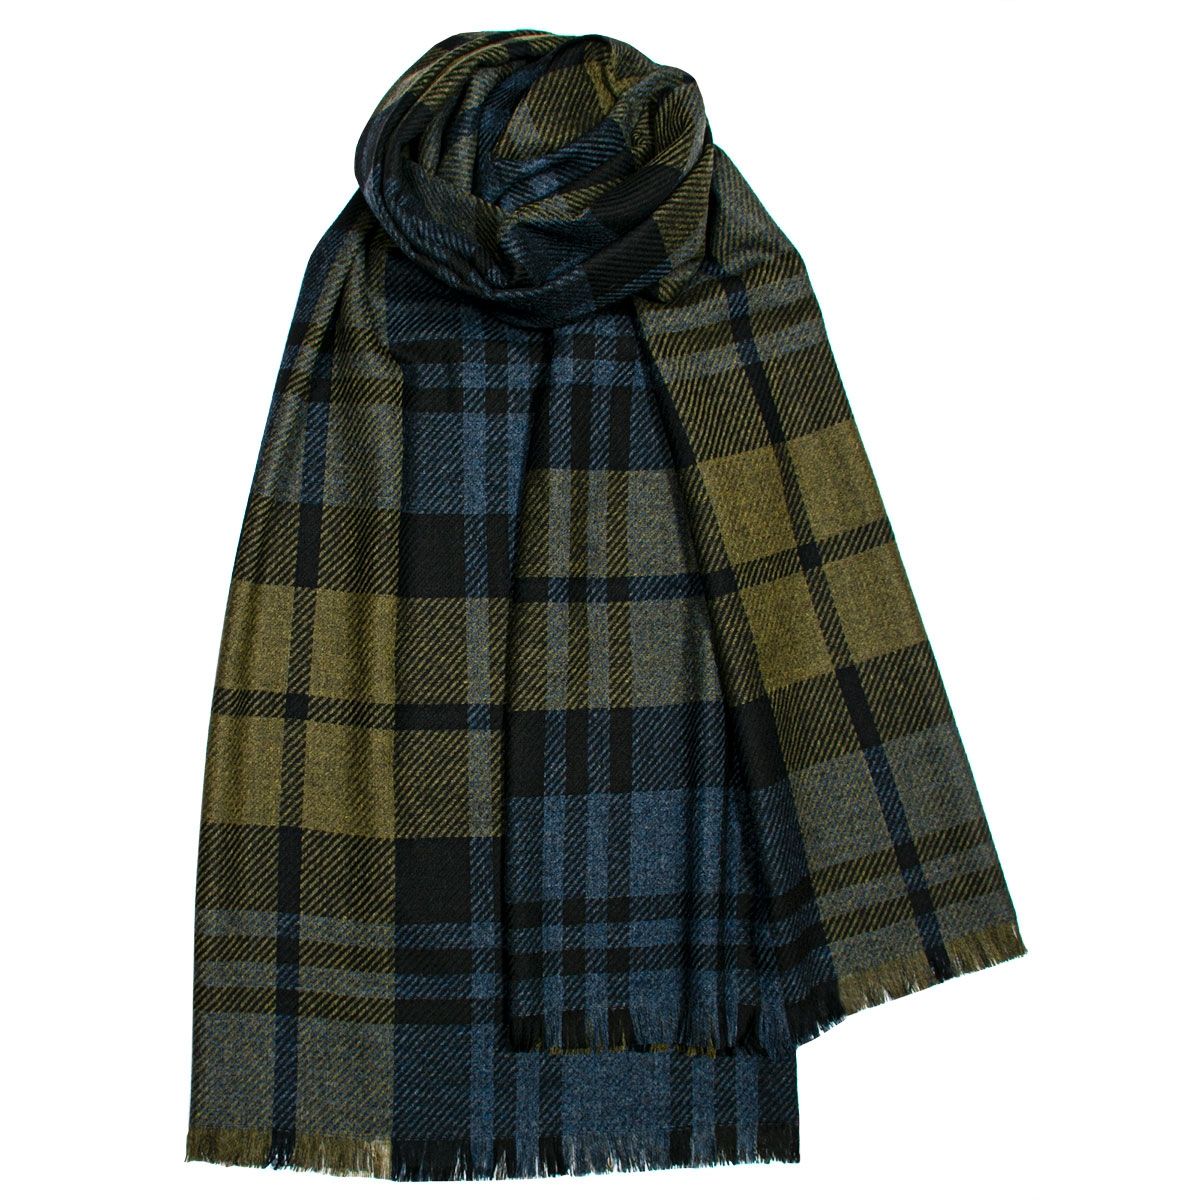 Brock Fine Wool and Cashmere Shawl/Stole Black Watch Olive